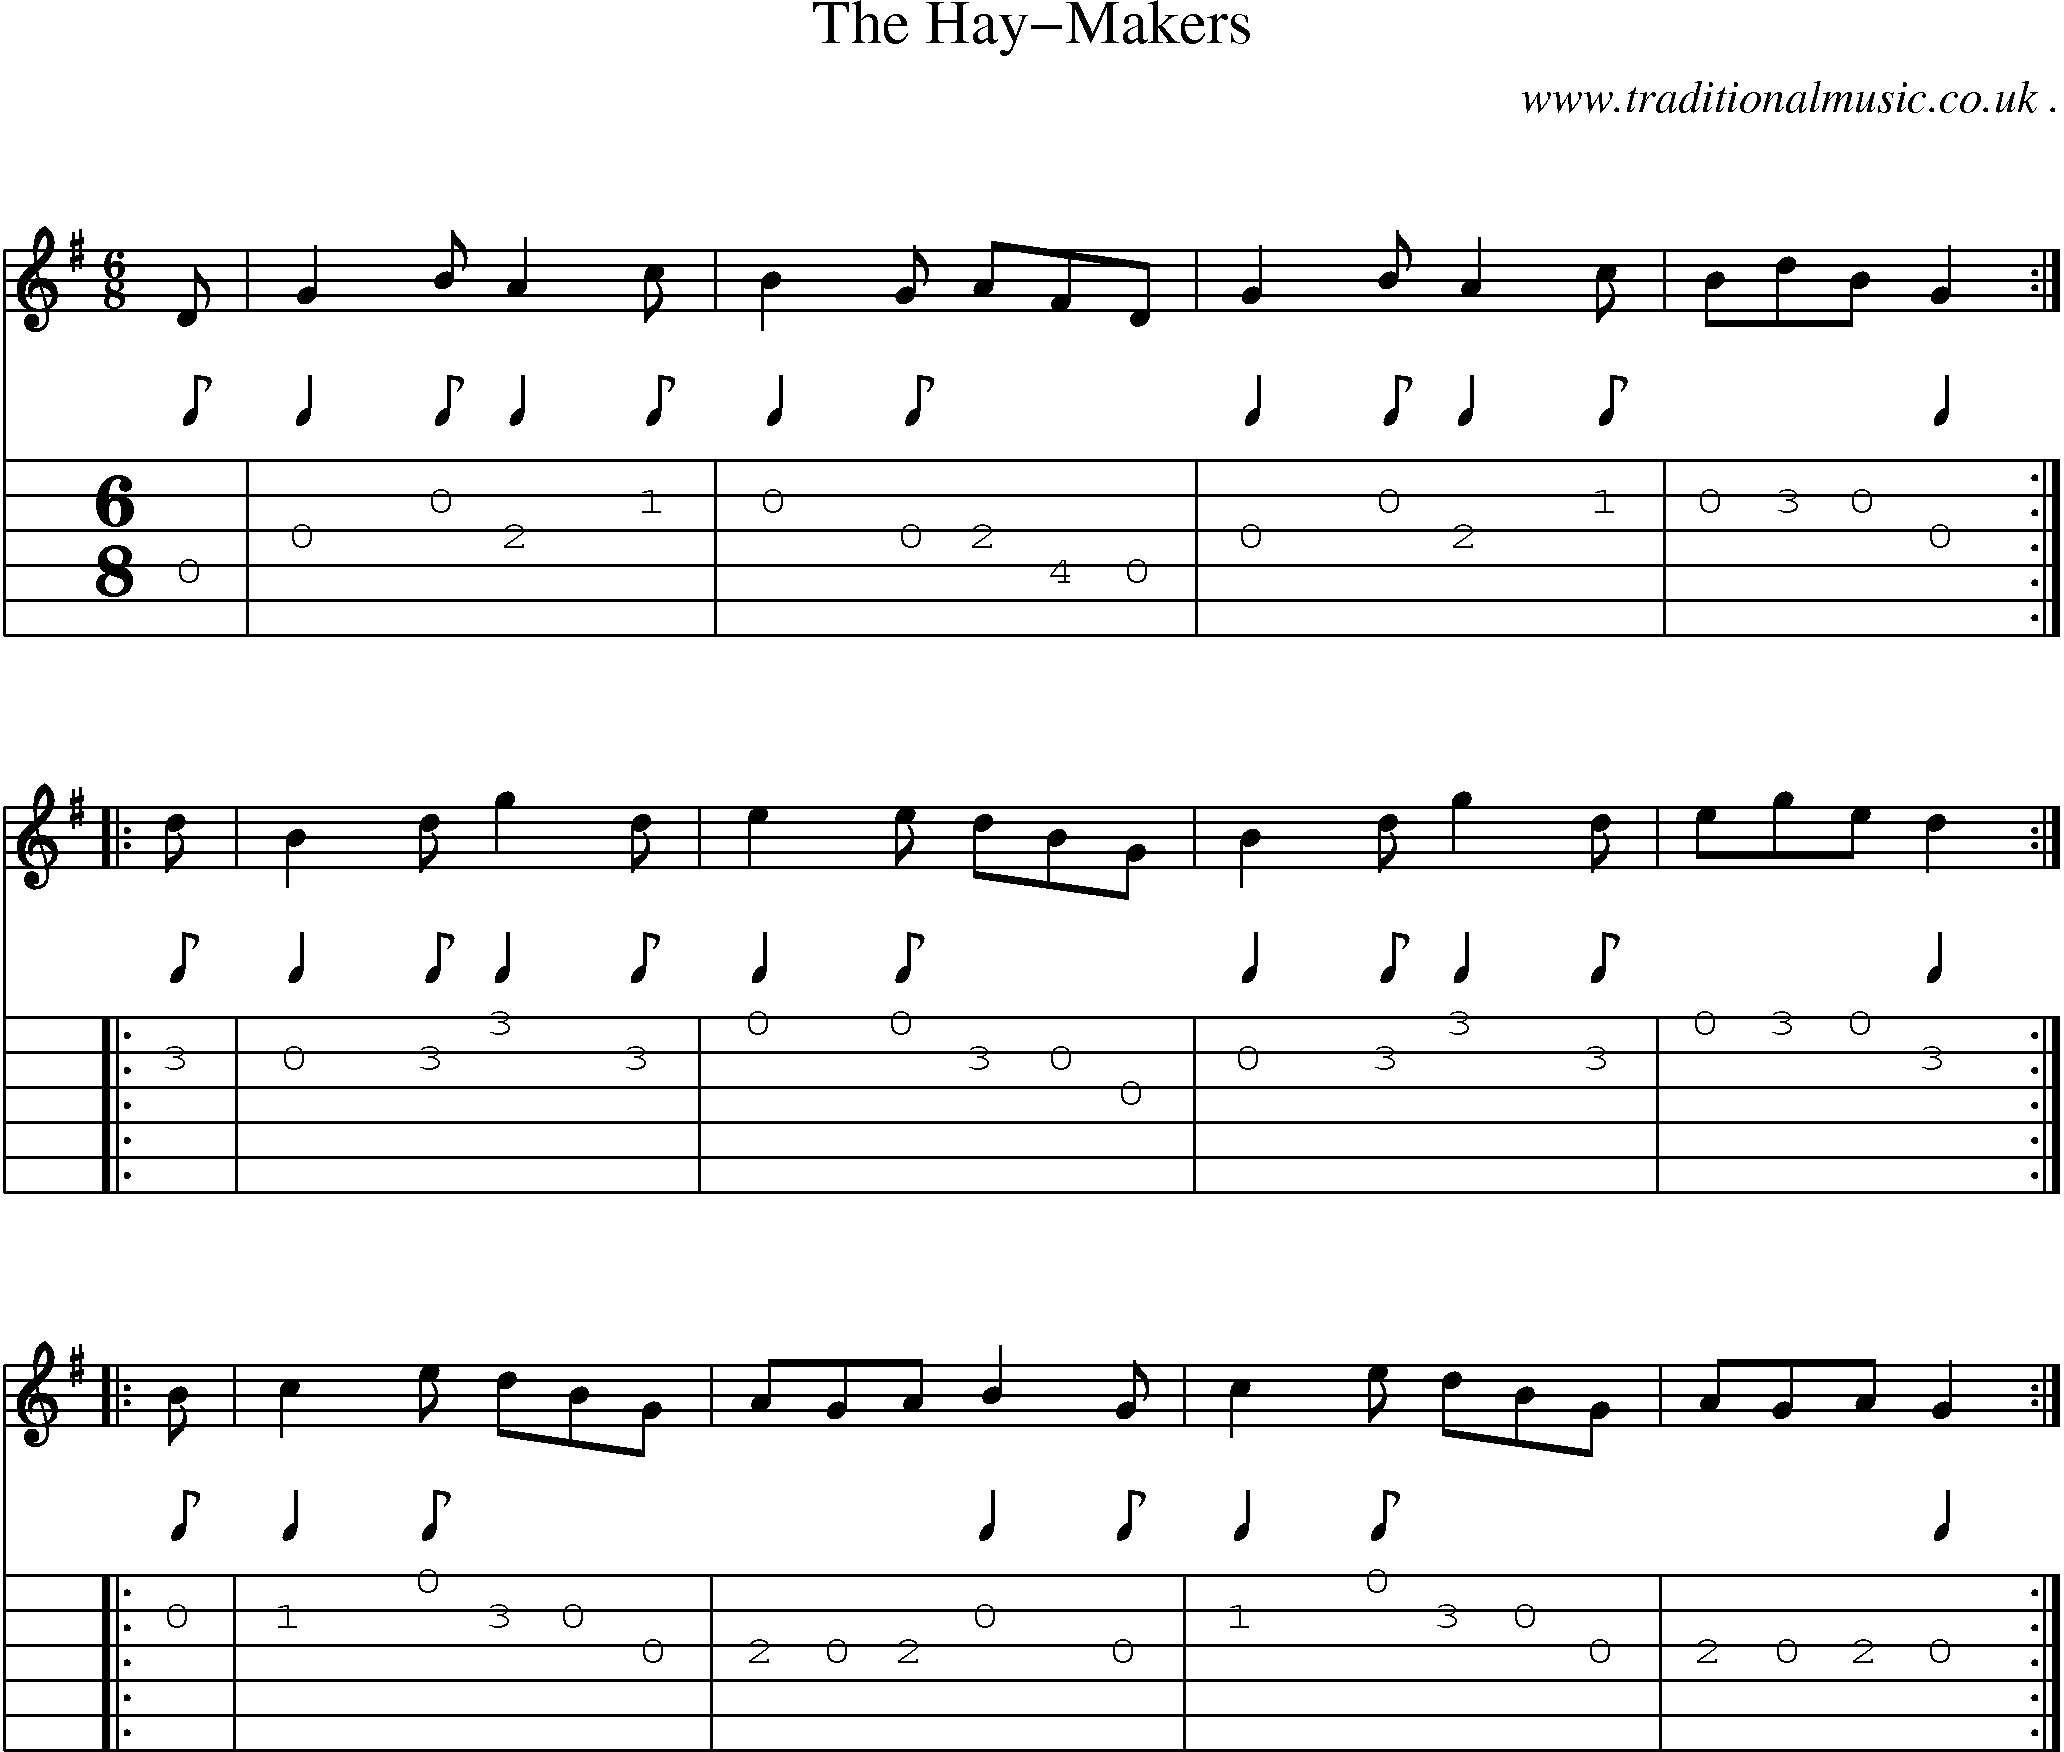 Sheet-music  score, Chords and Guitar Tabs for The Hay-makers